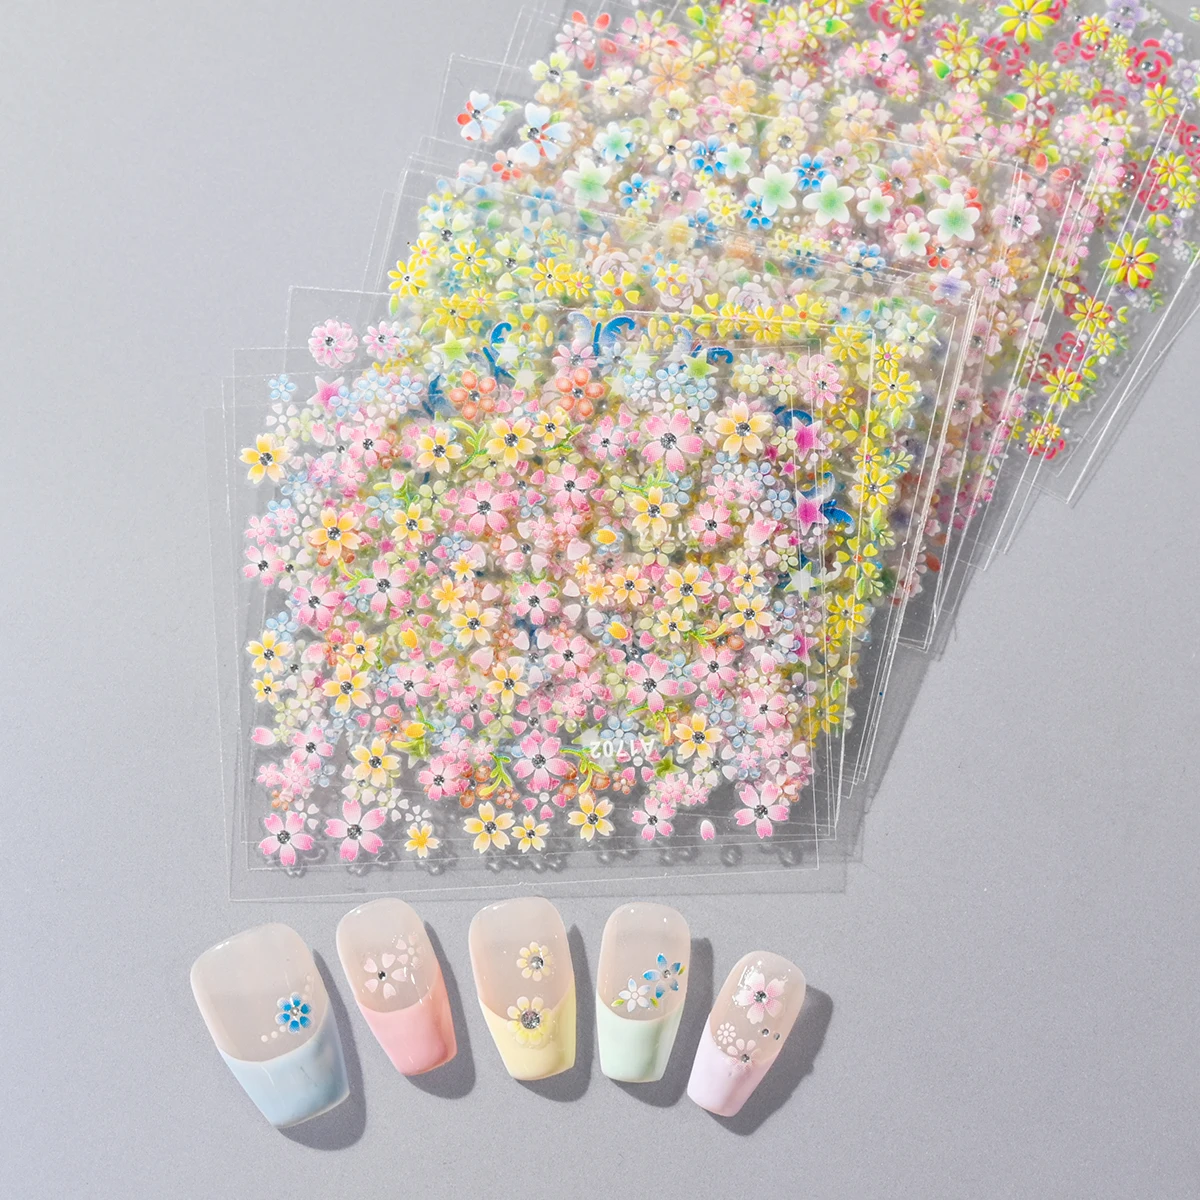 24pcs/set 3D Colorful Love Heart Flowers Nail Art Stickers Self-Adhesive Slider Design DIY Manicure Nail Decorations Stickers